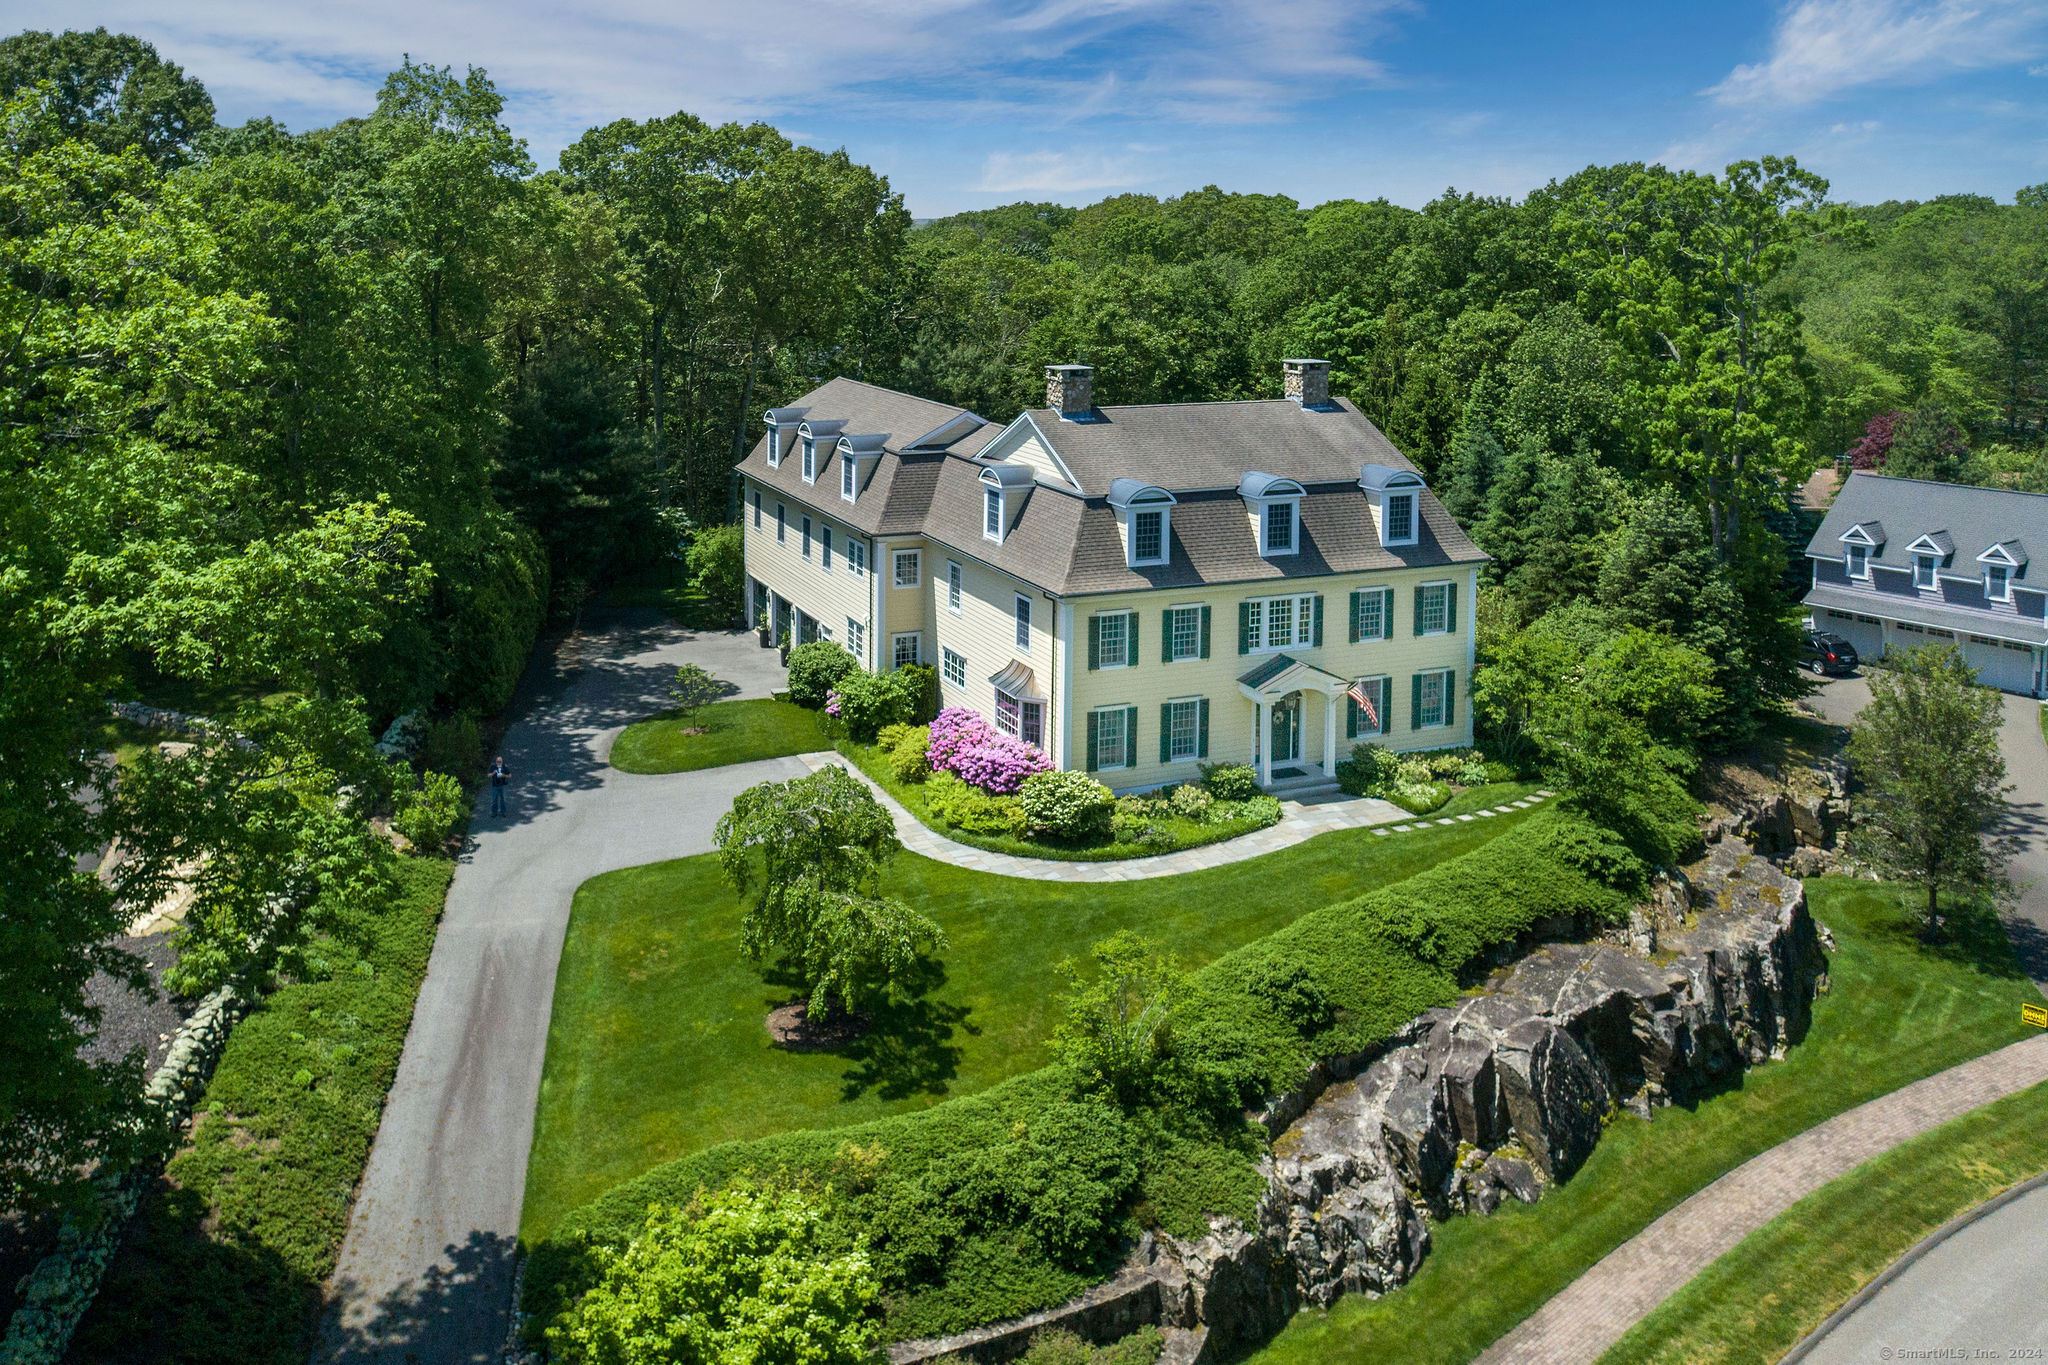 37 Lantern Hill Road, Madison, Connecticut - 6 Bedrooms  
5.5 Bathrooms  
12 Rooms - 